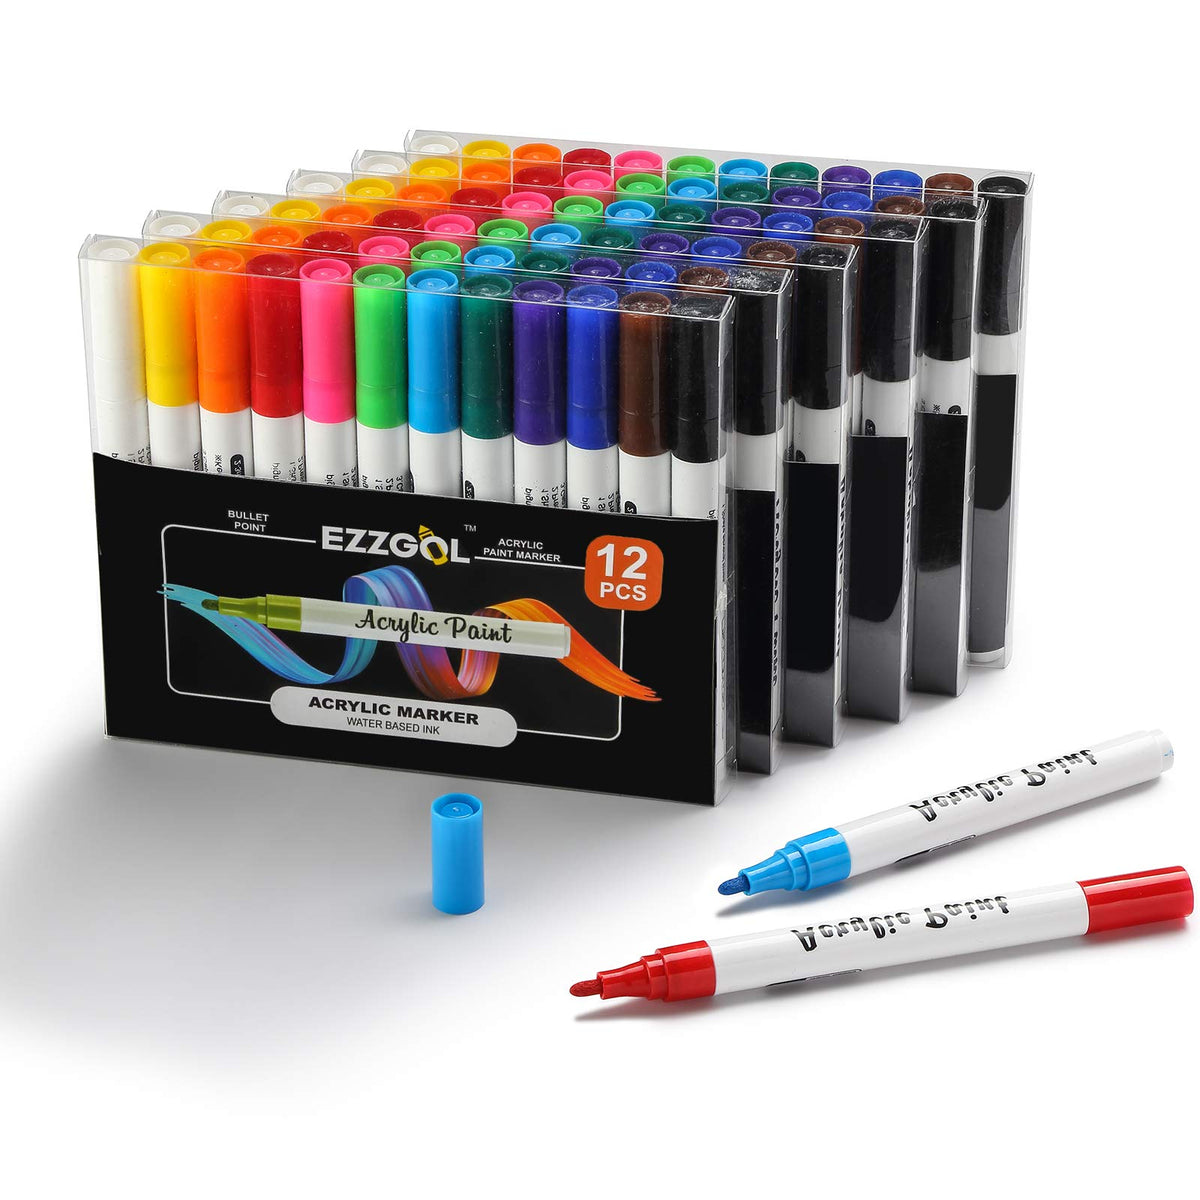 Tooli-art Acrylic Paint Markers Paint Pens Assorted Vibrant Markers for Rock Painting, Canvas, Glass, Mugs, Wood, Ceramic, Fabric, Meta